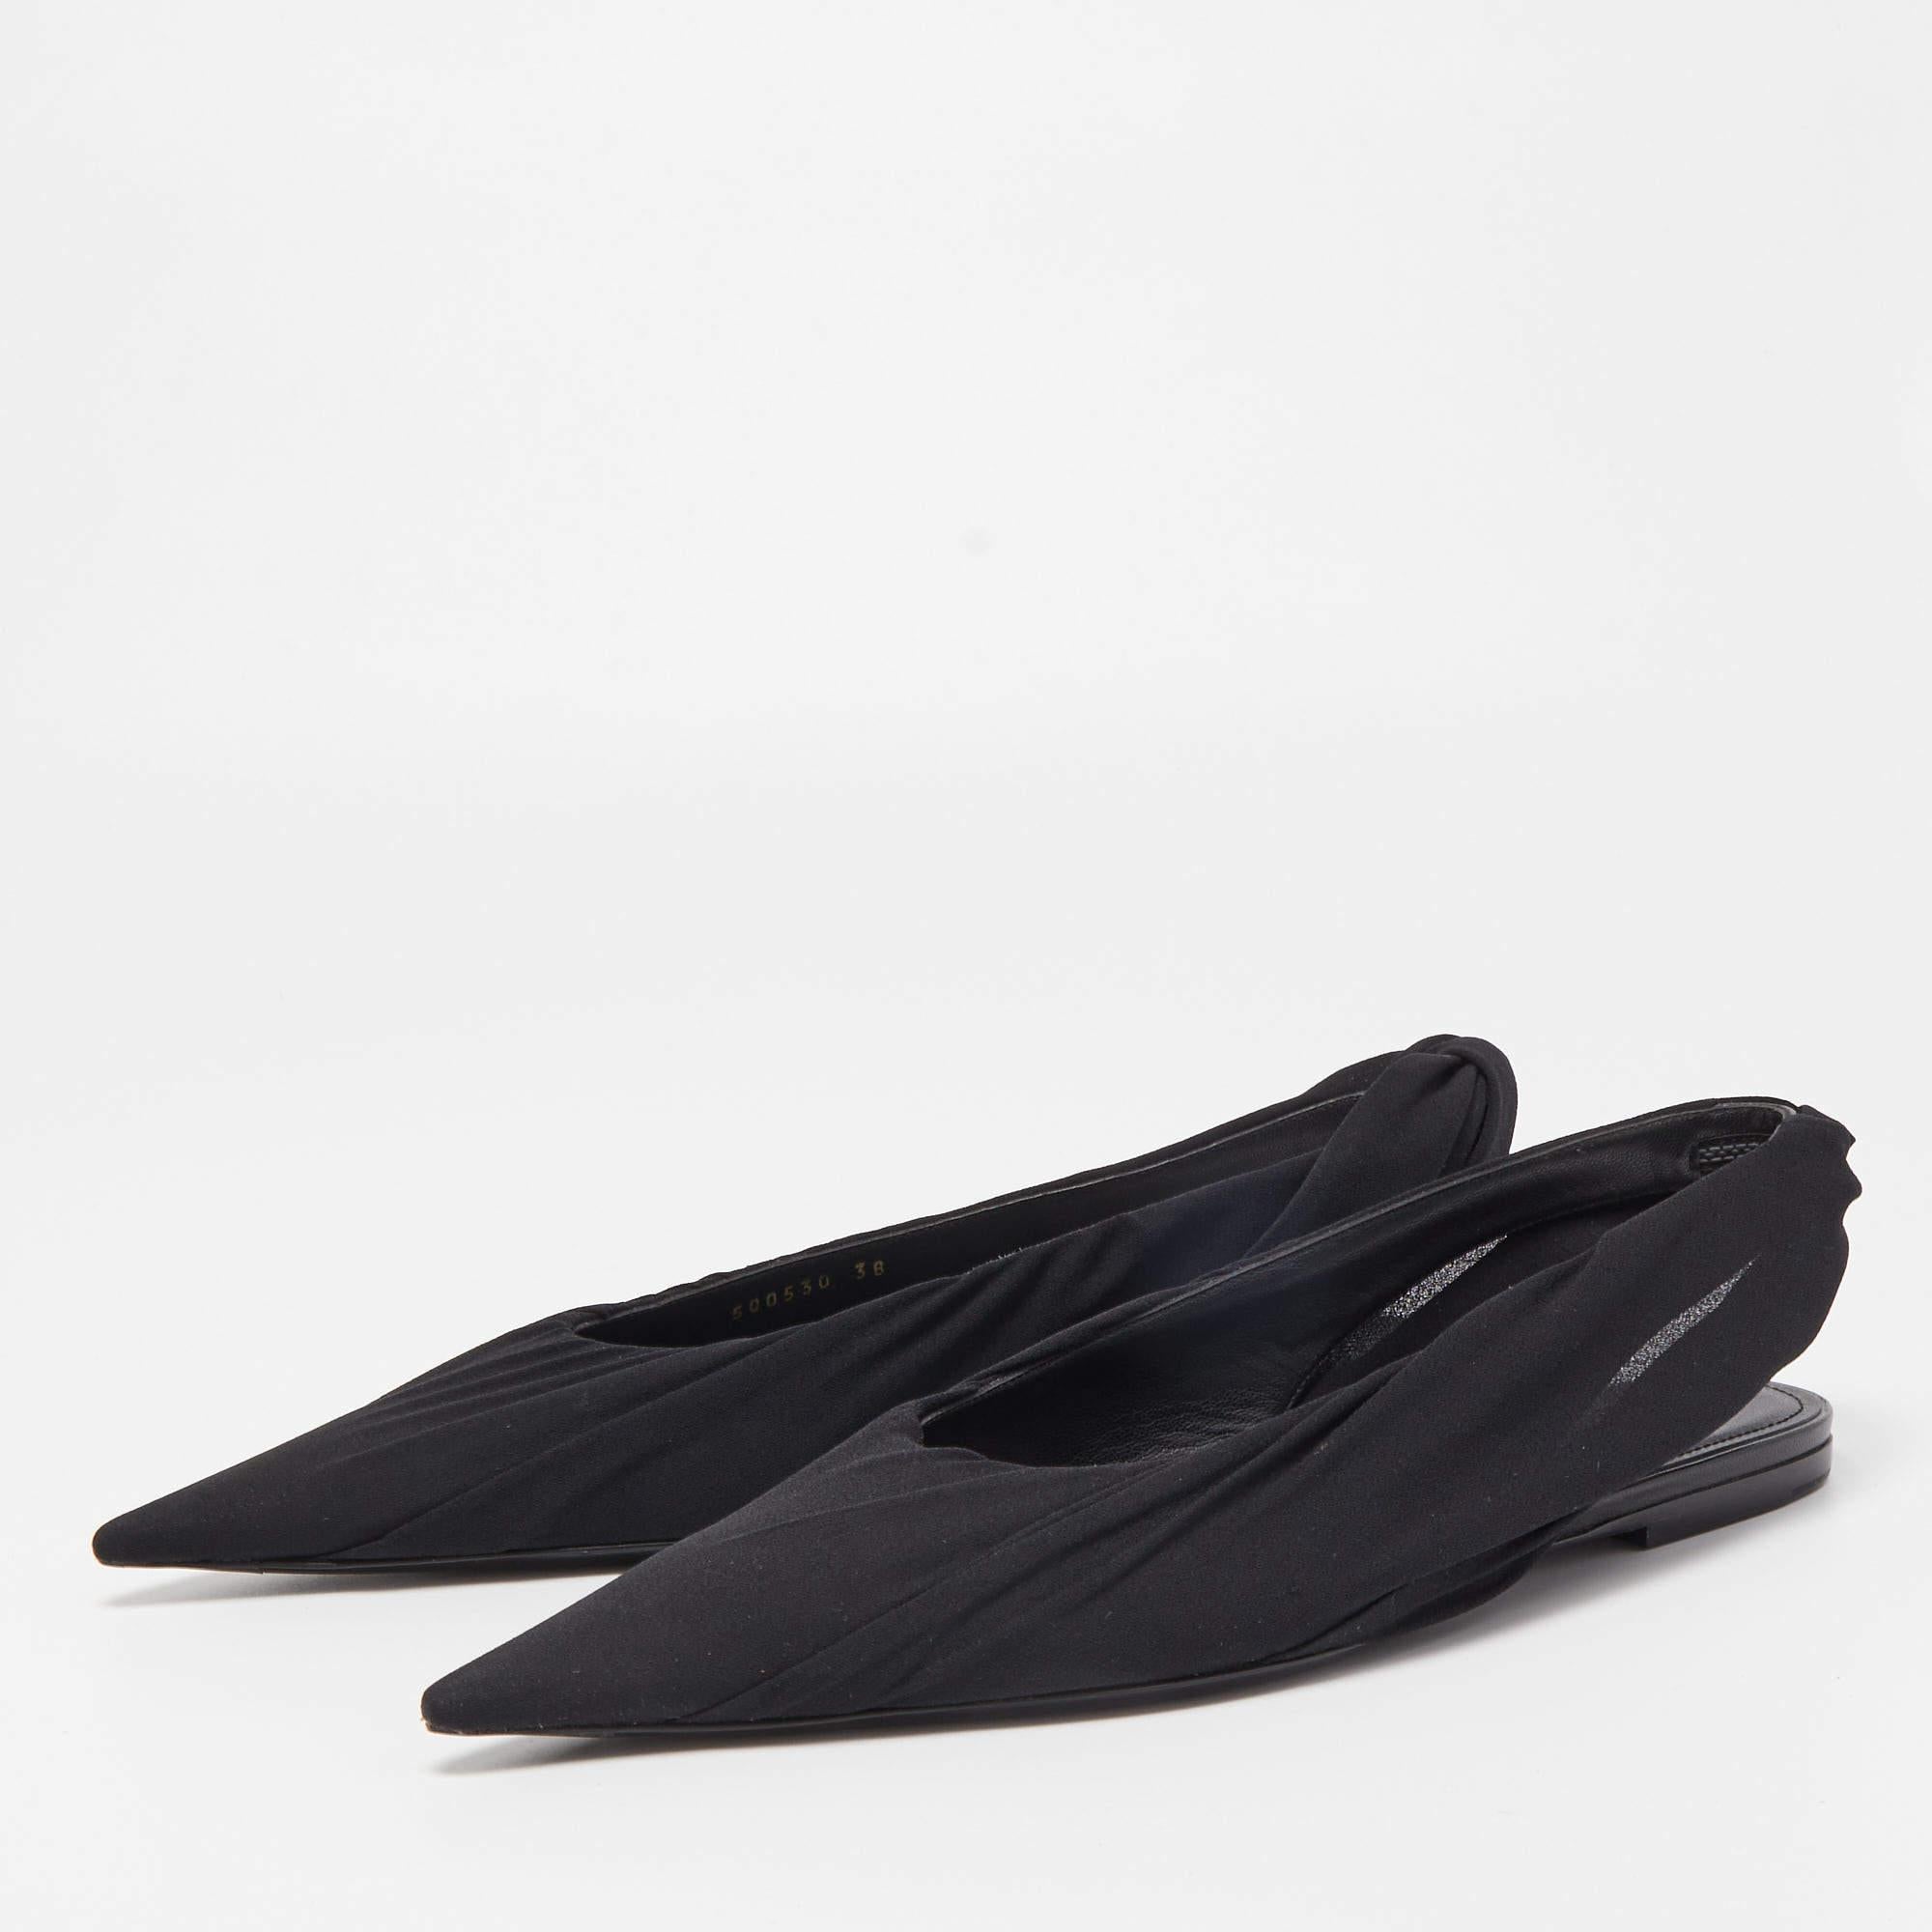 The Balenciaga flats are elegant and versatile footwear. Crafted from sleek black fabric, they feature a pointed toe and a slender slingback strap for a chic, minimalist look. These flats offer comfort and style, making them a perfect choice for